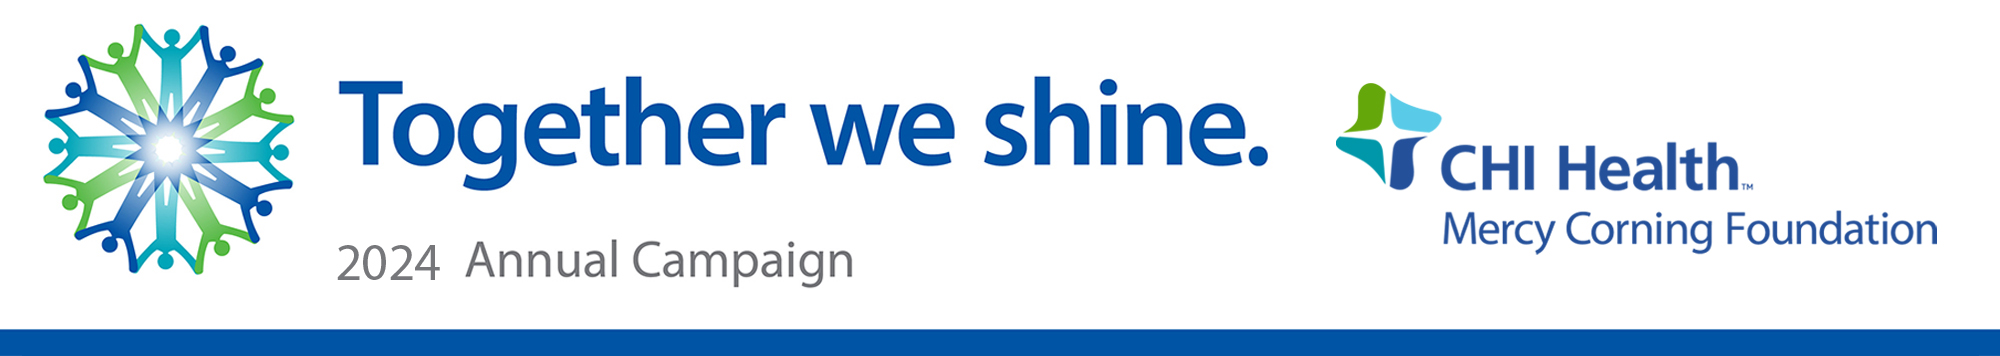 CHI Health Mercy Corning Together We Shine Campaign Banner